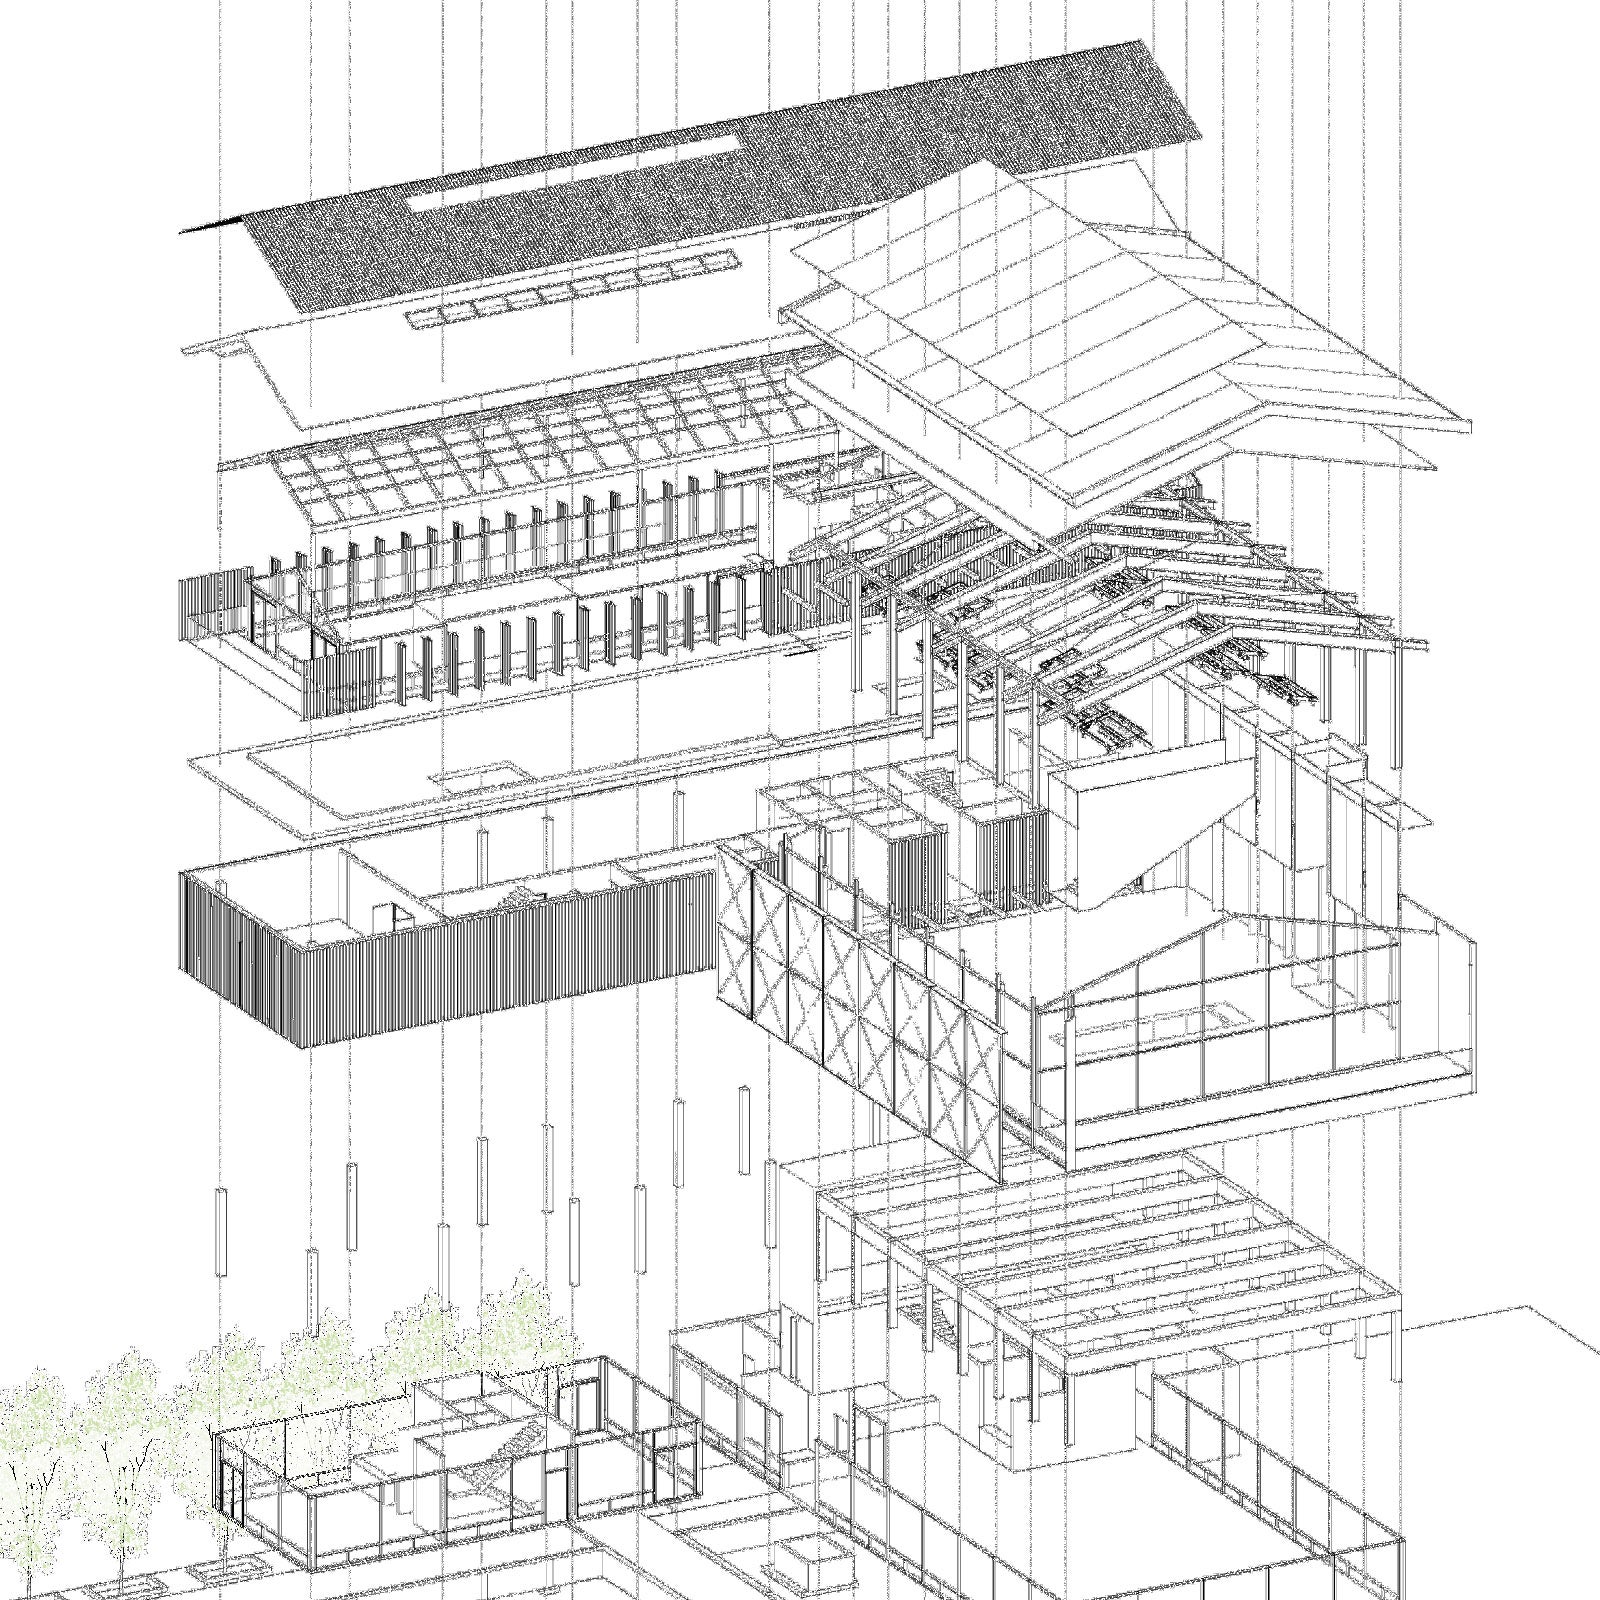 An exploded axonometric construction drawing of the pavilion.